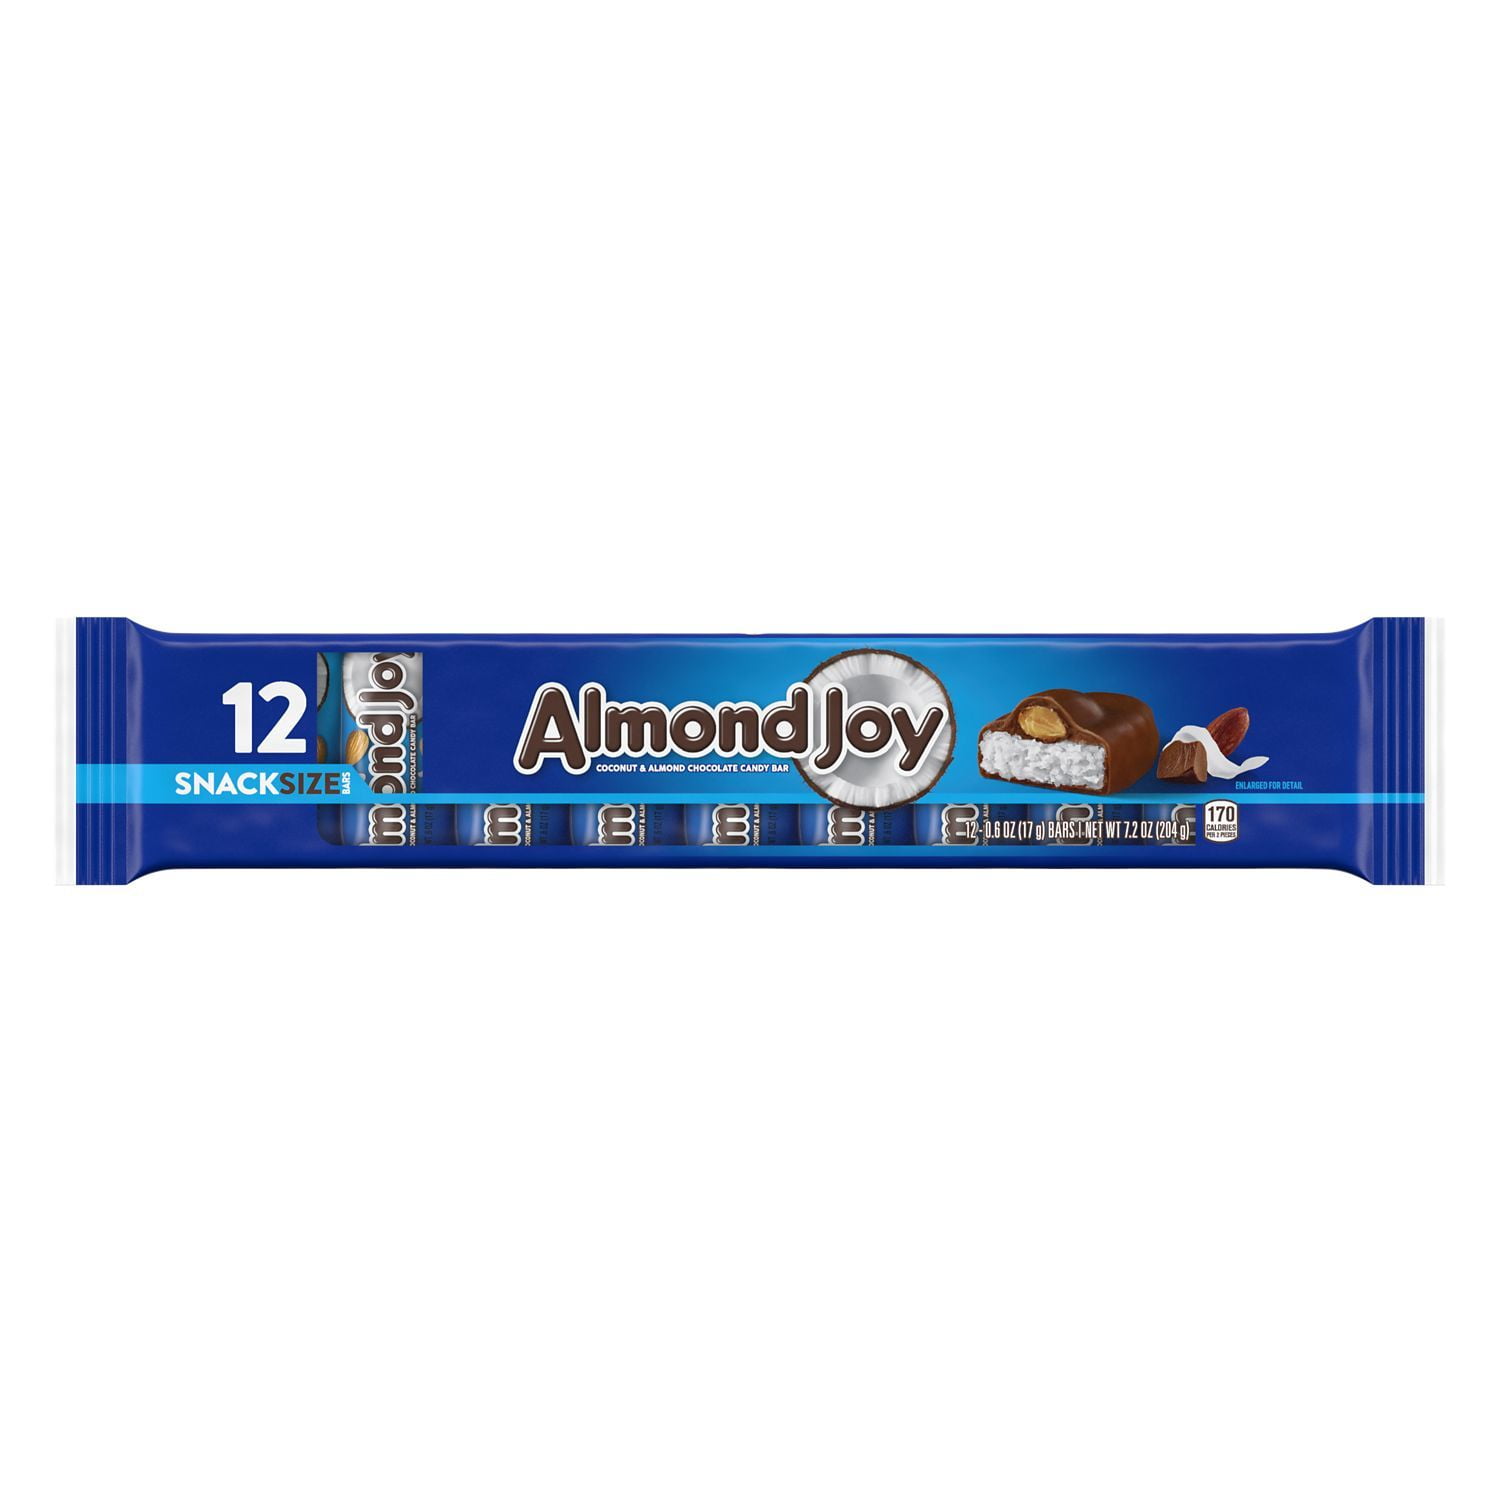 ALMOND JOY, Coconut and Almond Chocolate Snack Size Candy, Gluten Free, Individually Wrapped, 0.6 oz, Bars (12 Count)